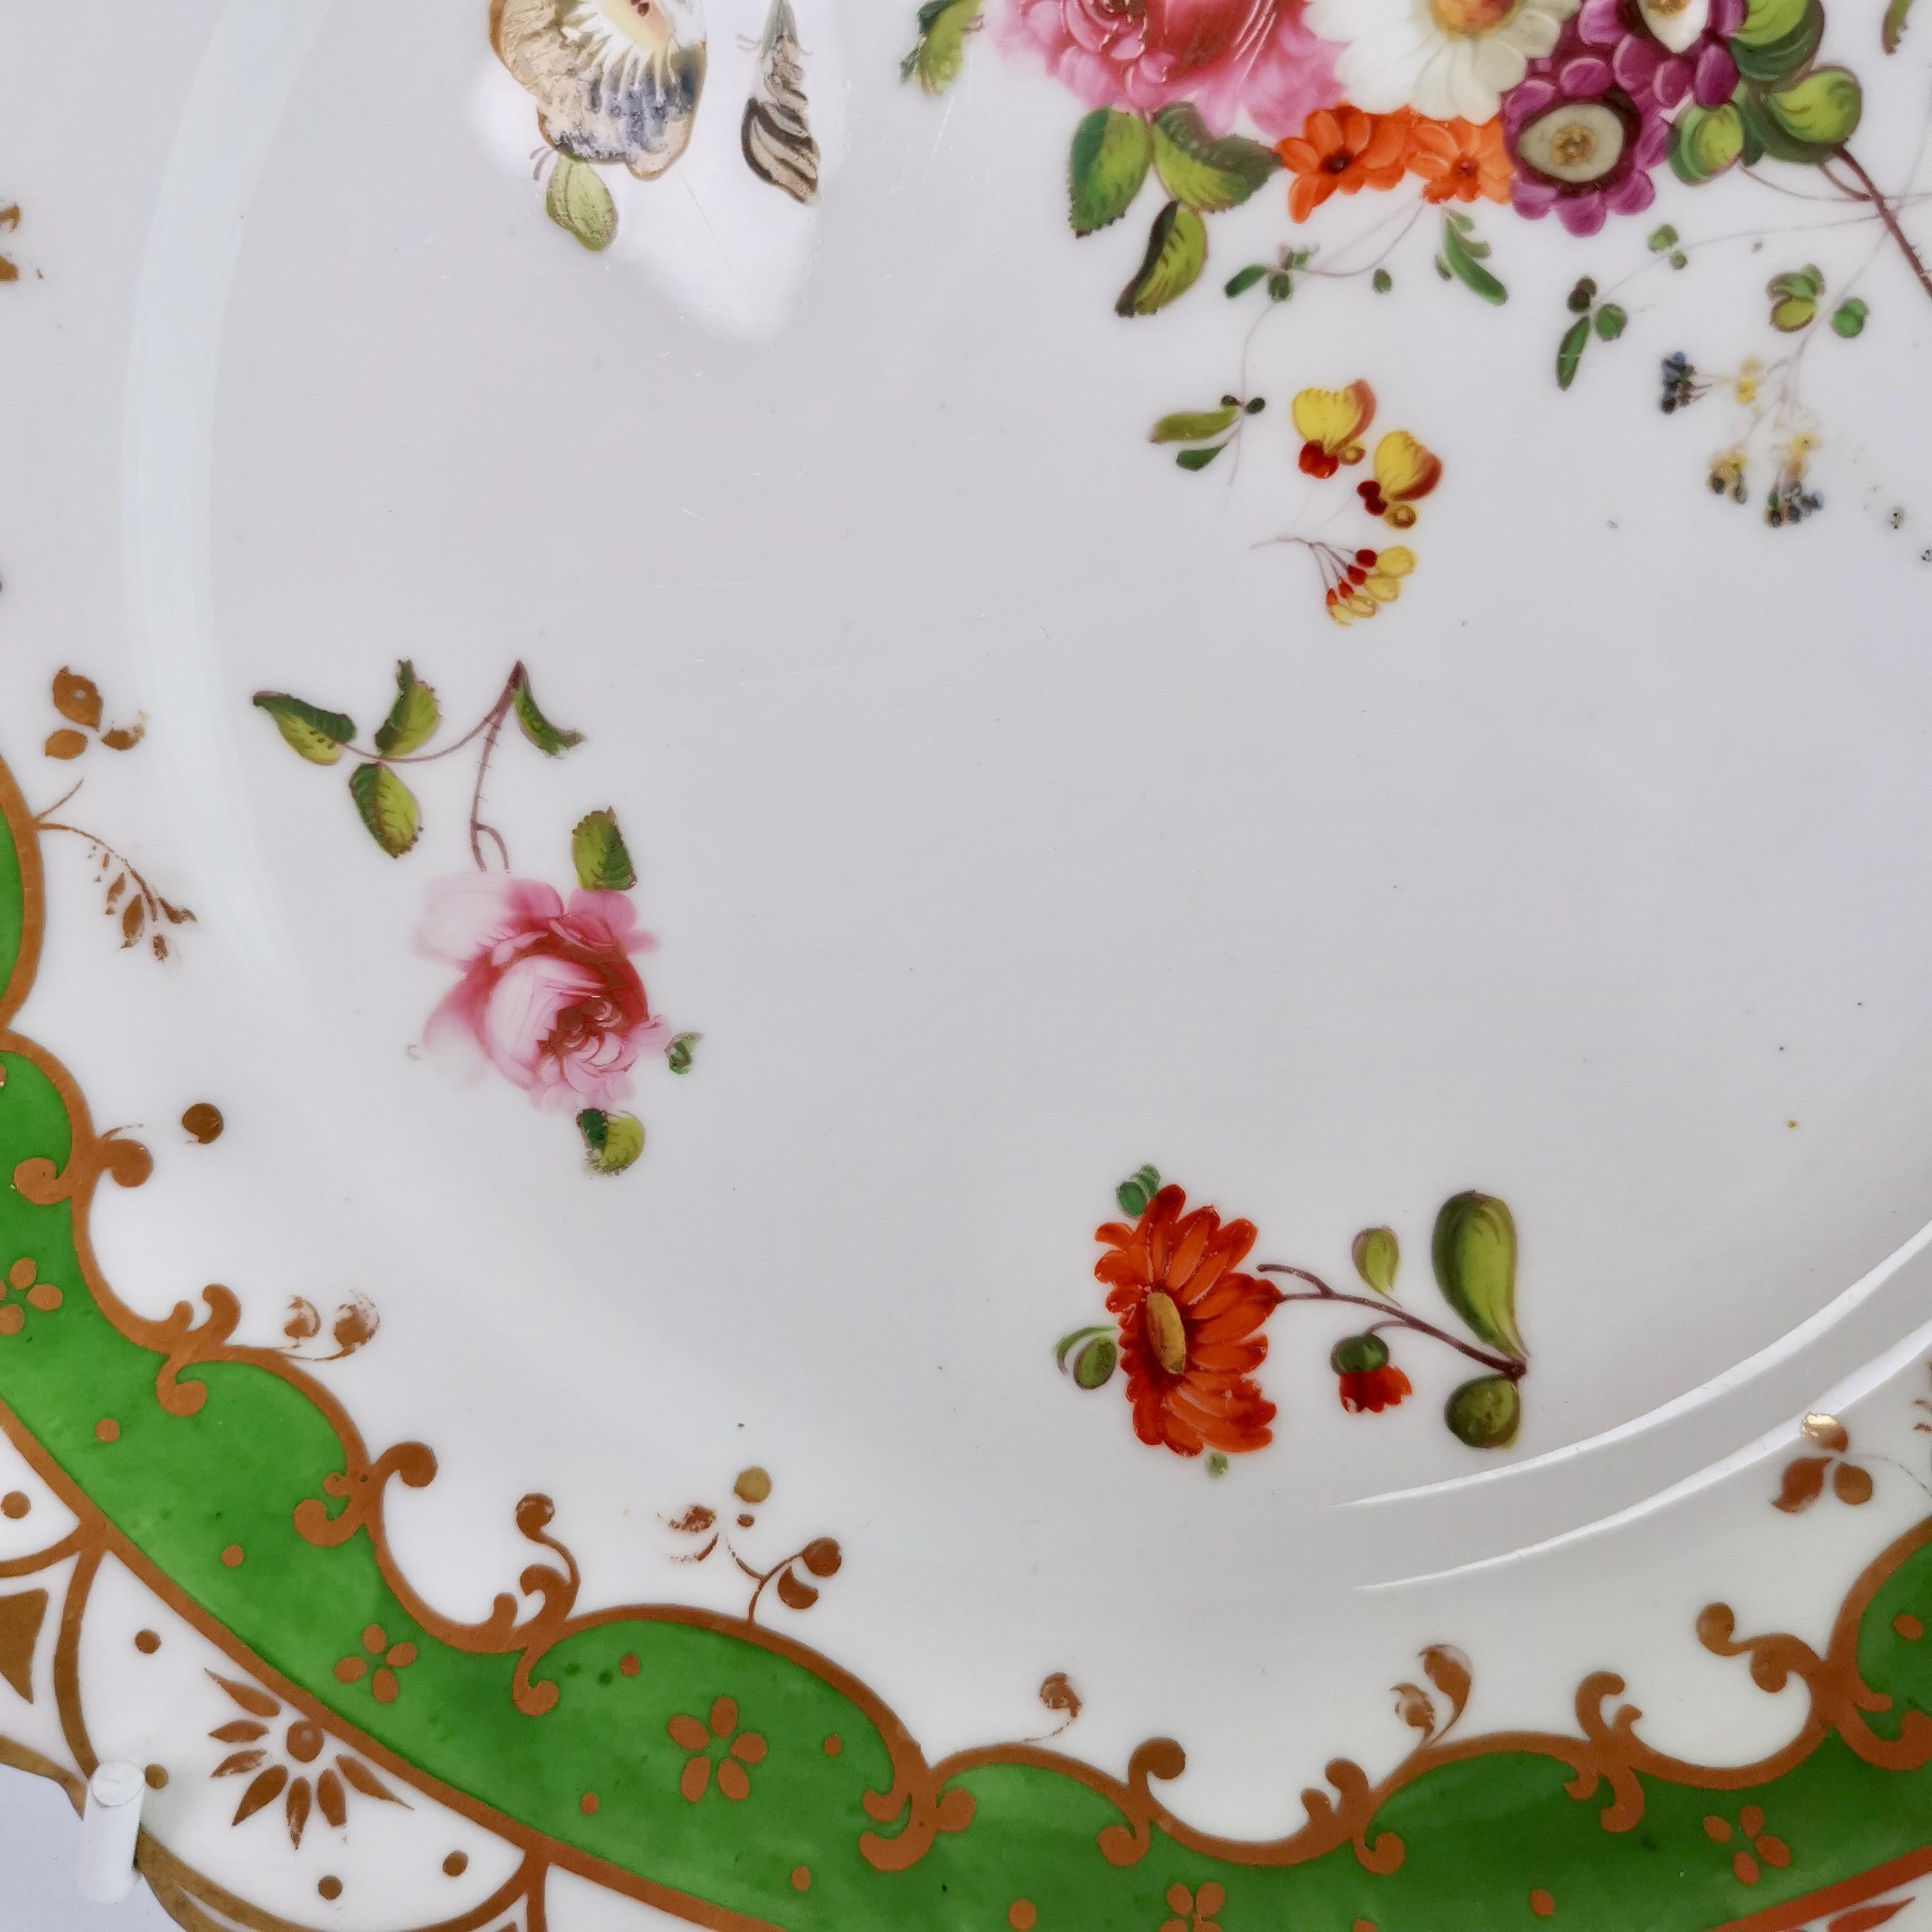 Hand-Painted Ridgway Porcelain Plate, Green with Hand Painted Flowers, ca 1832